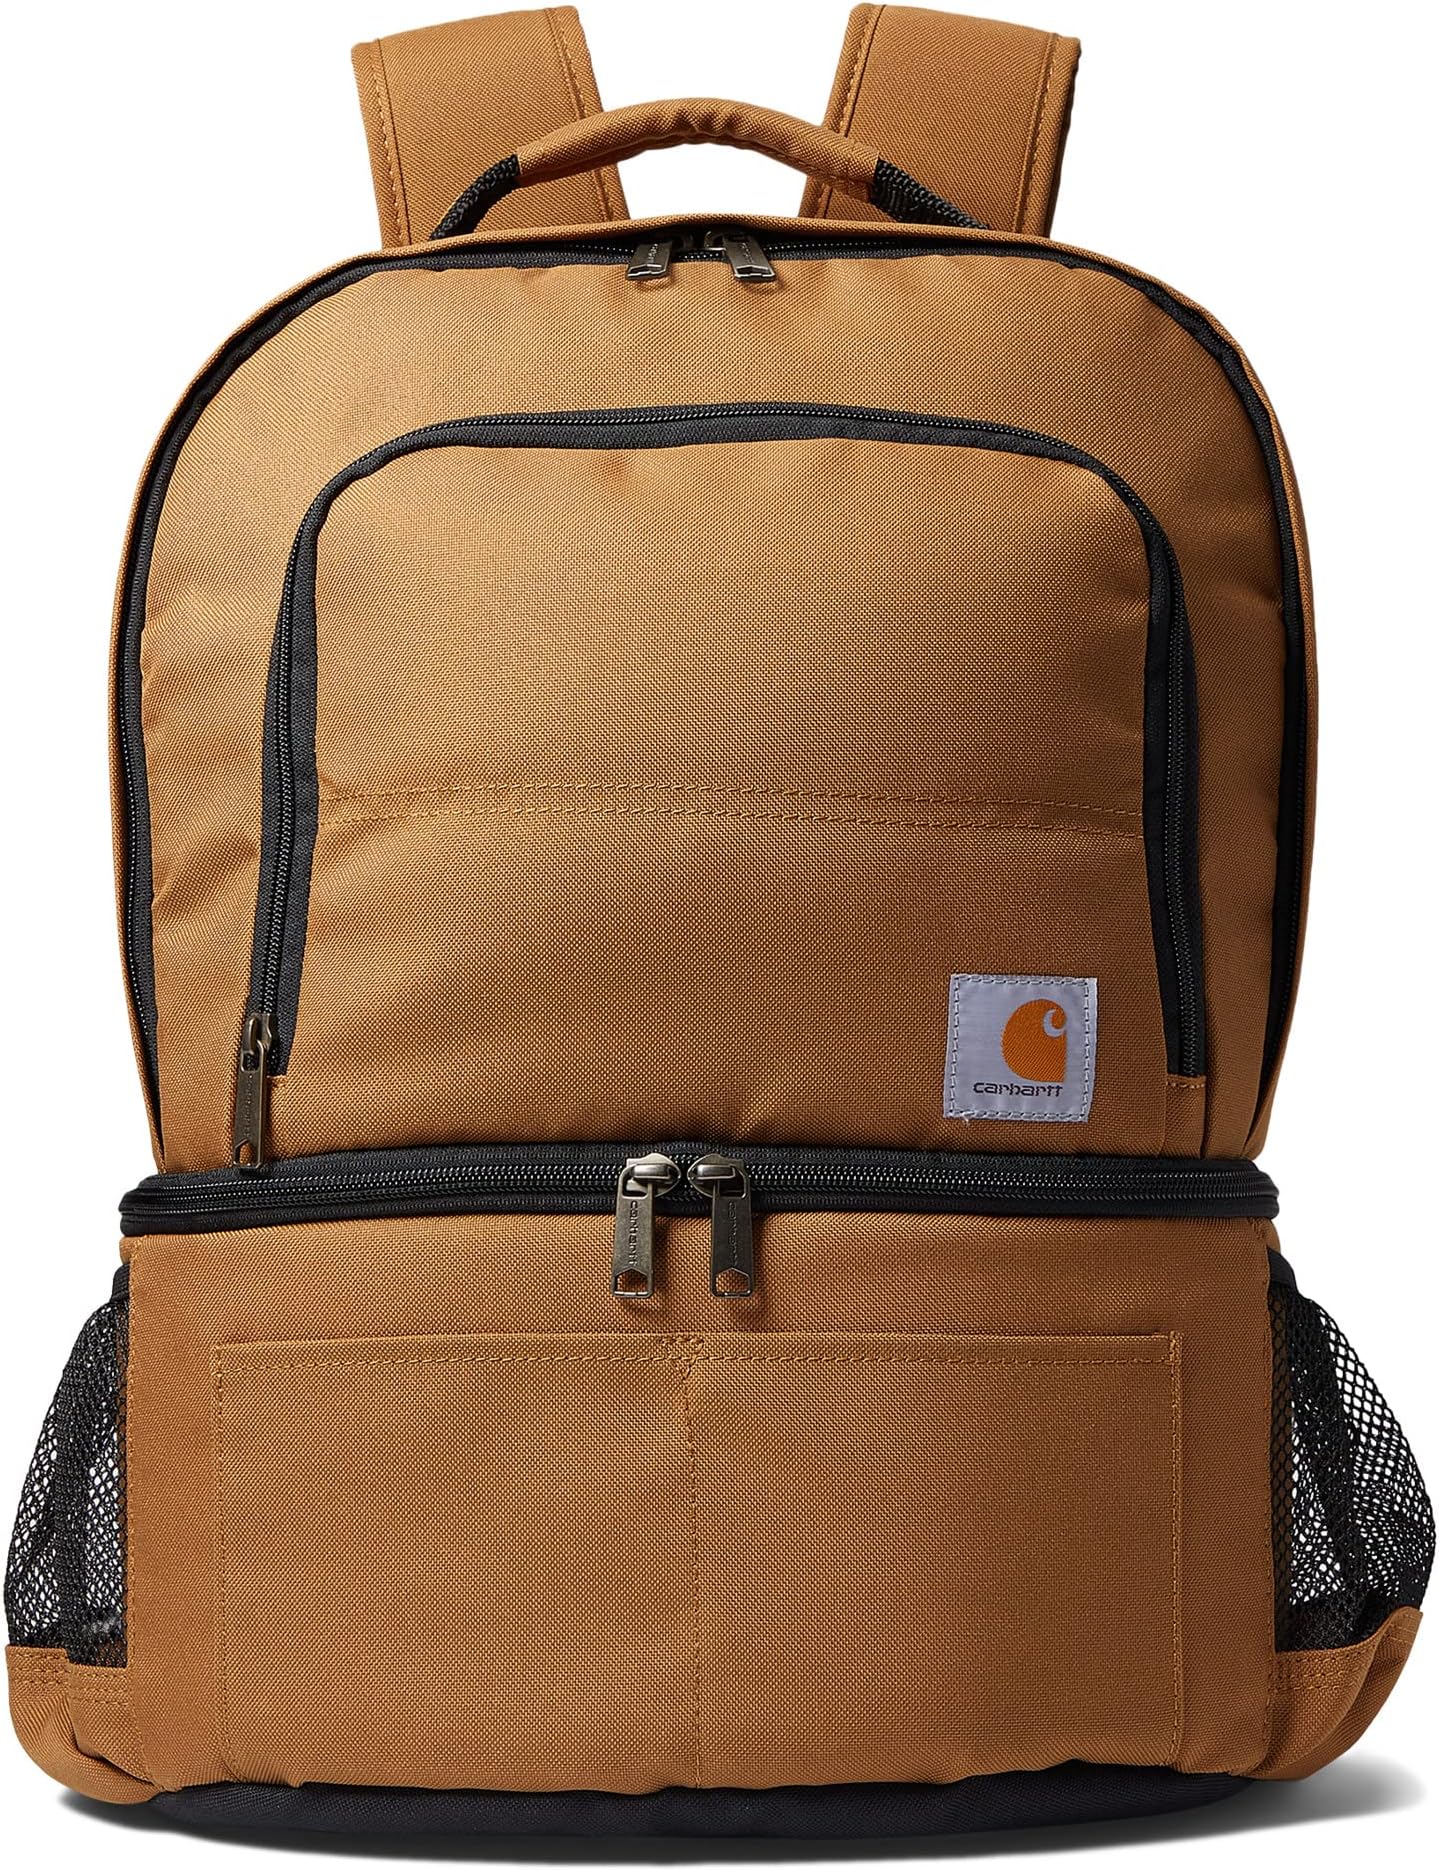 Рюкзак Insulated 24 Can Two Compartment Cooler Backpack Carhartt, цвет Carhartt Brown цена и фото